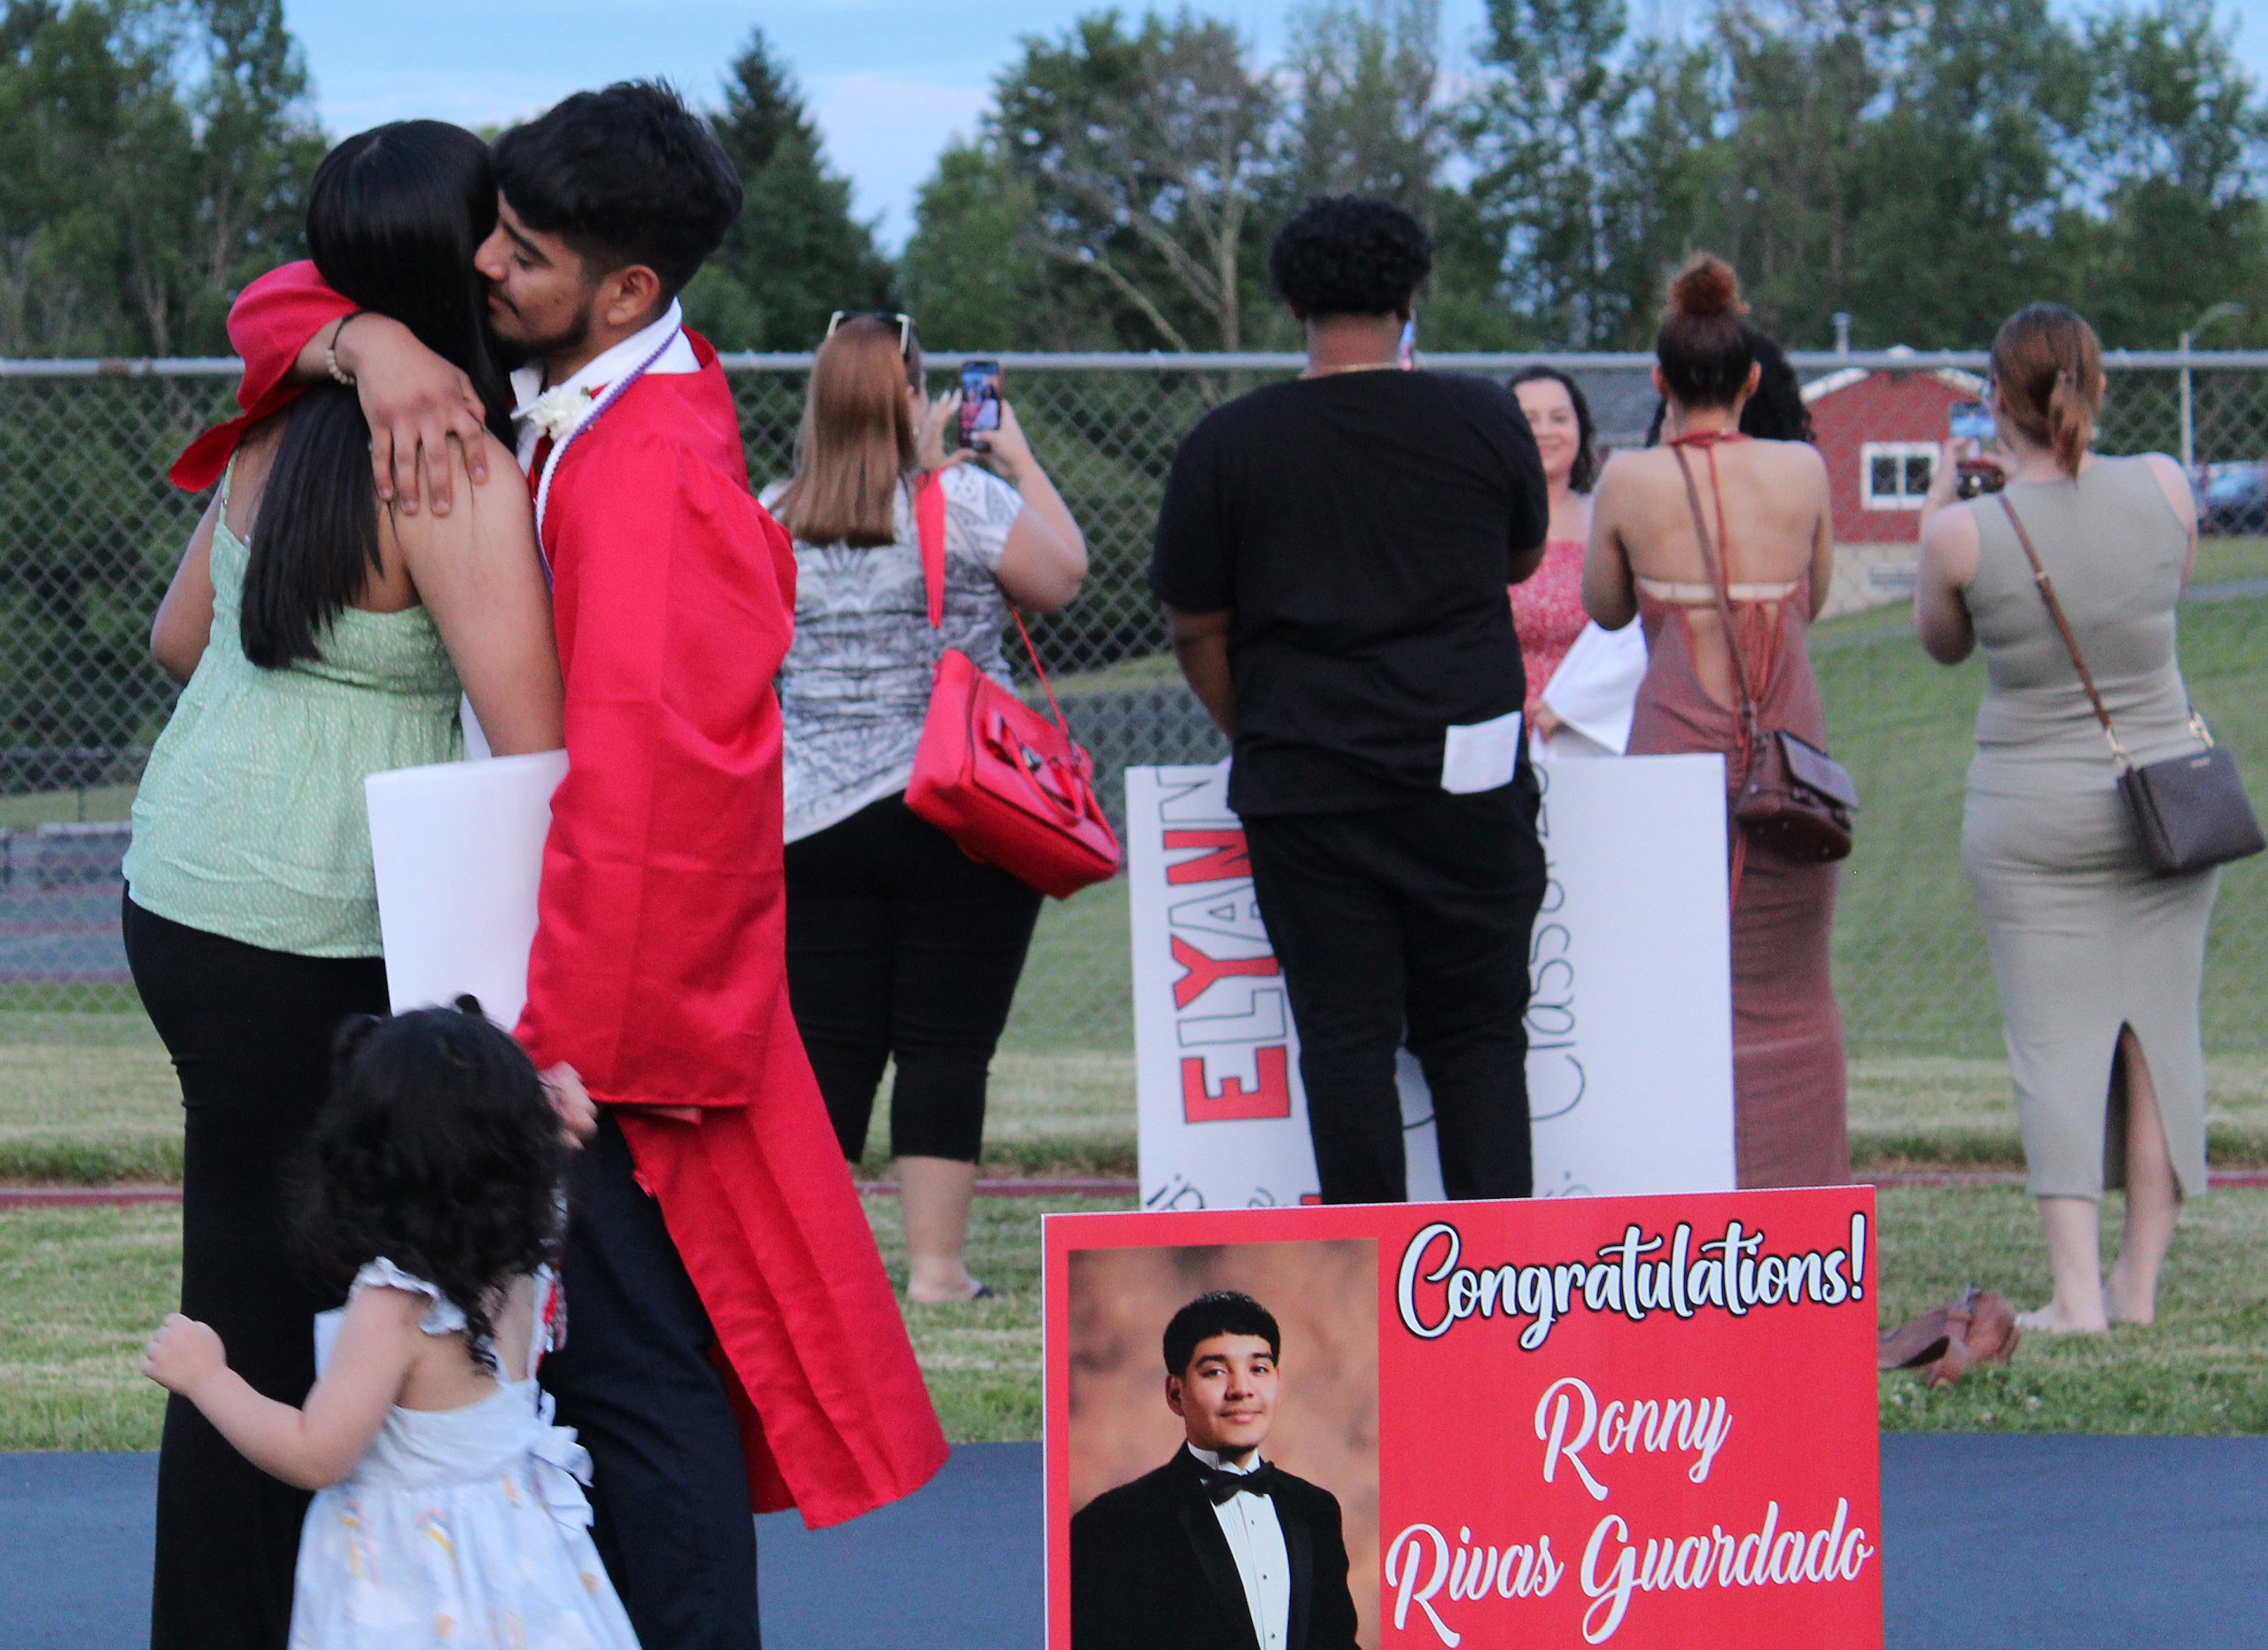 A graduate hugs an adult with a sign graduation sing in front of them as another group prepares to take photos in the back ground